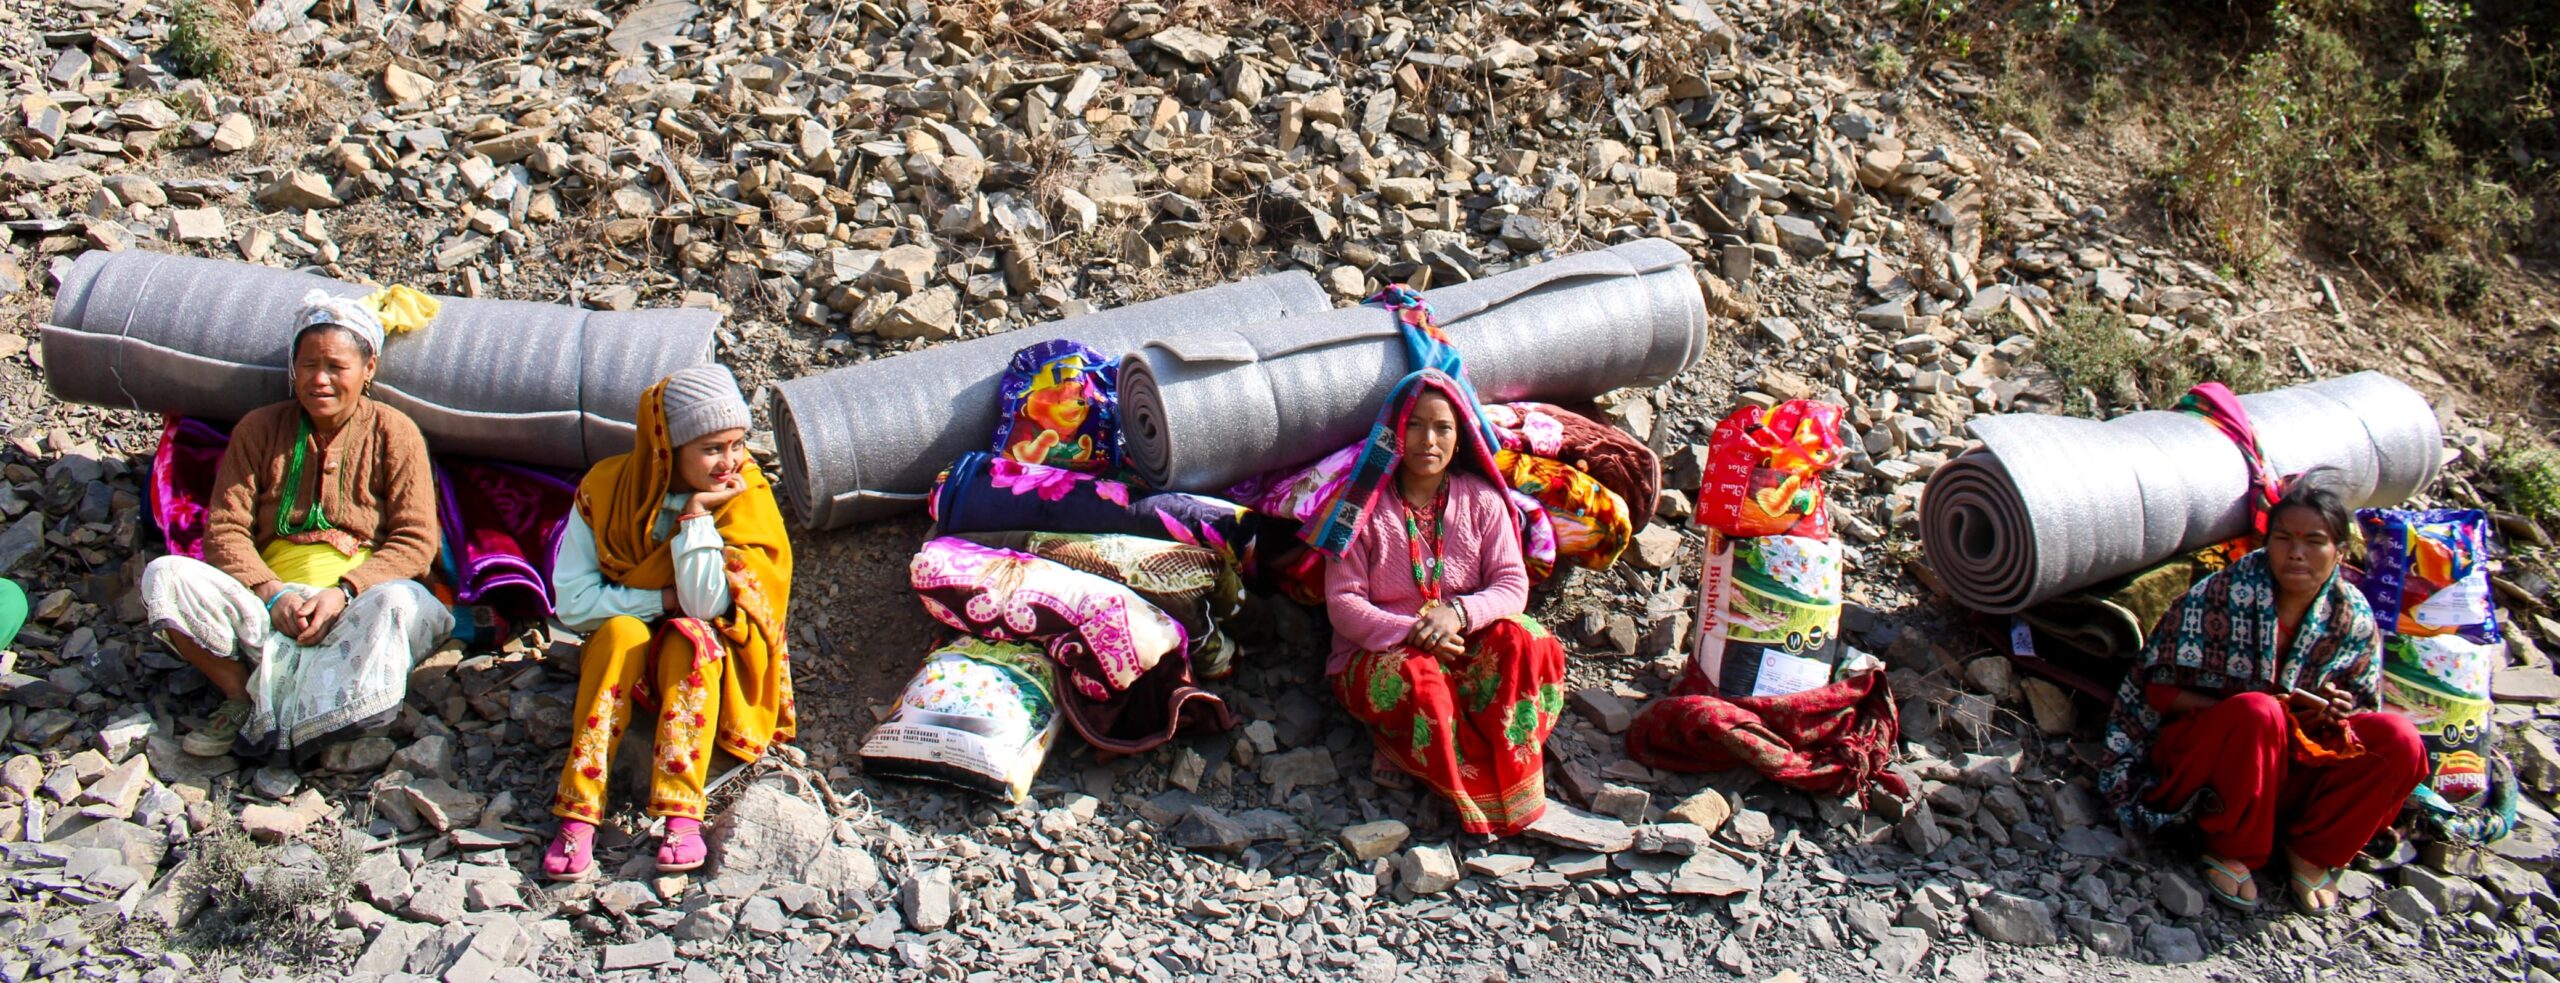 Jajarkot earthquake: supporting families during disasters in Nepal